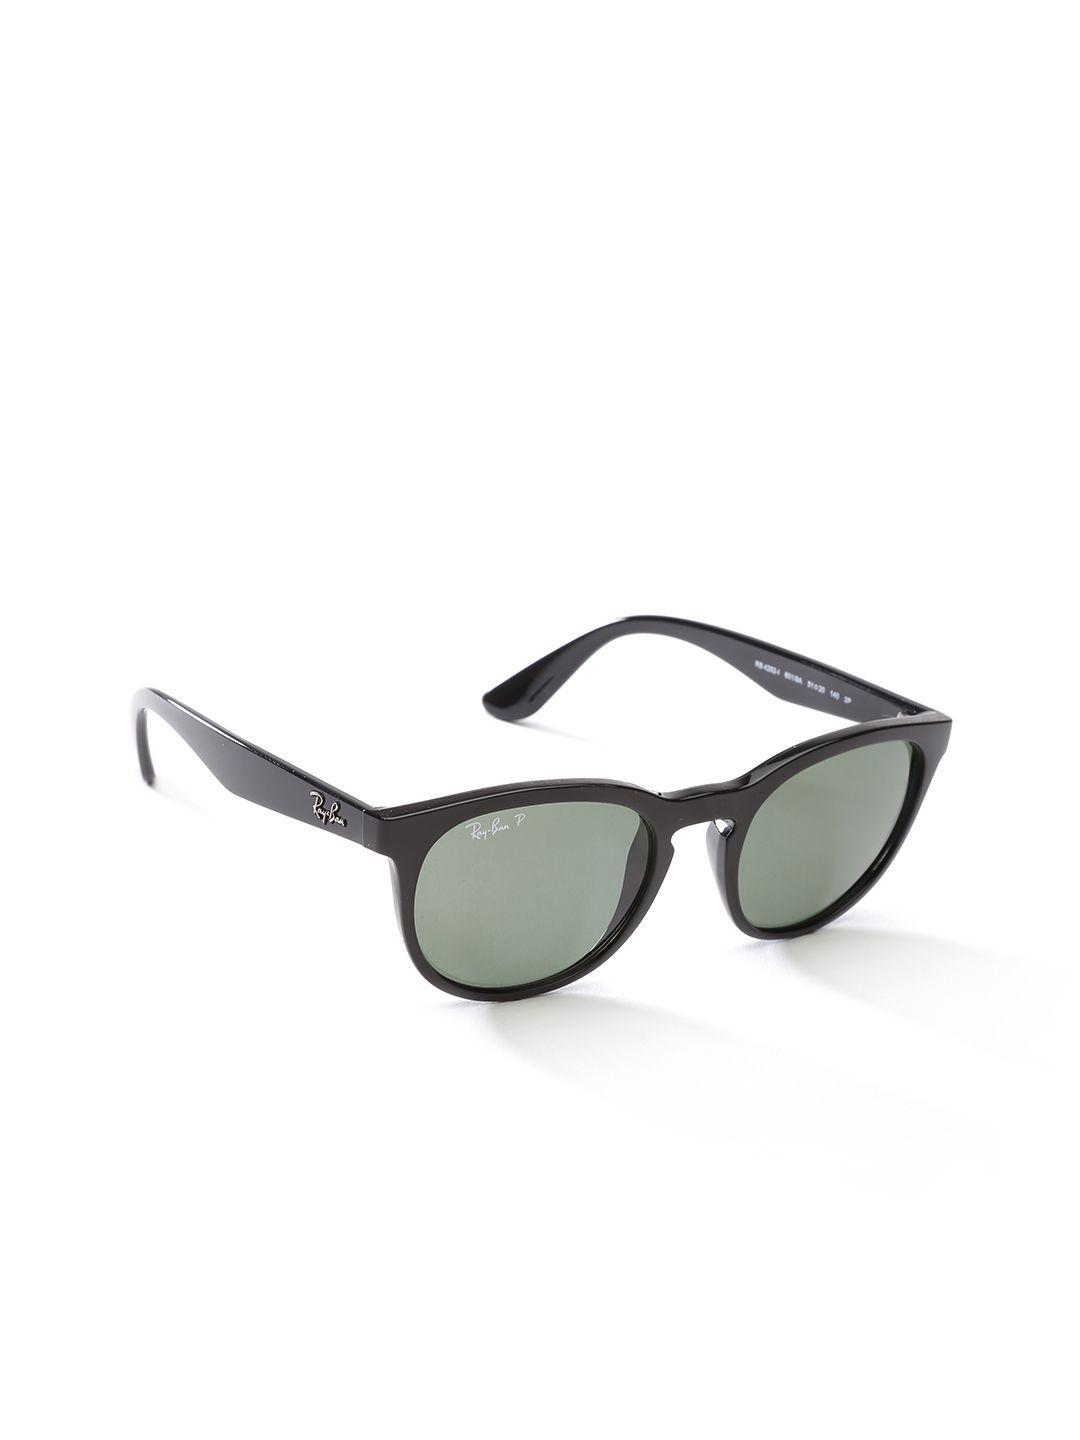 ray-ban unisex round sunglasses 0rb4252i601/9a51